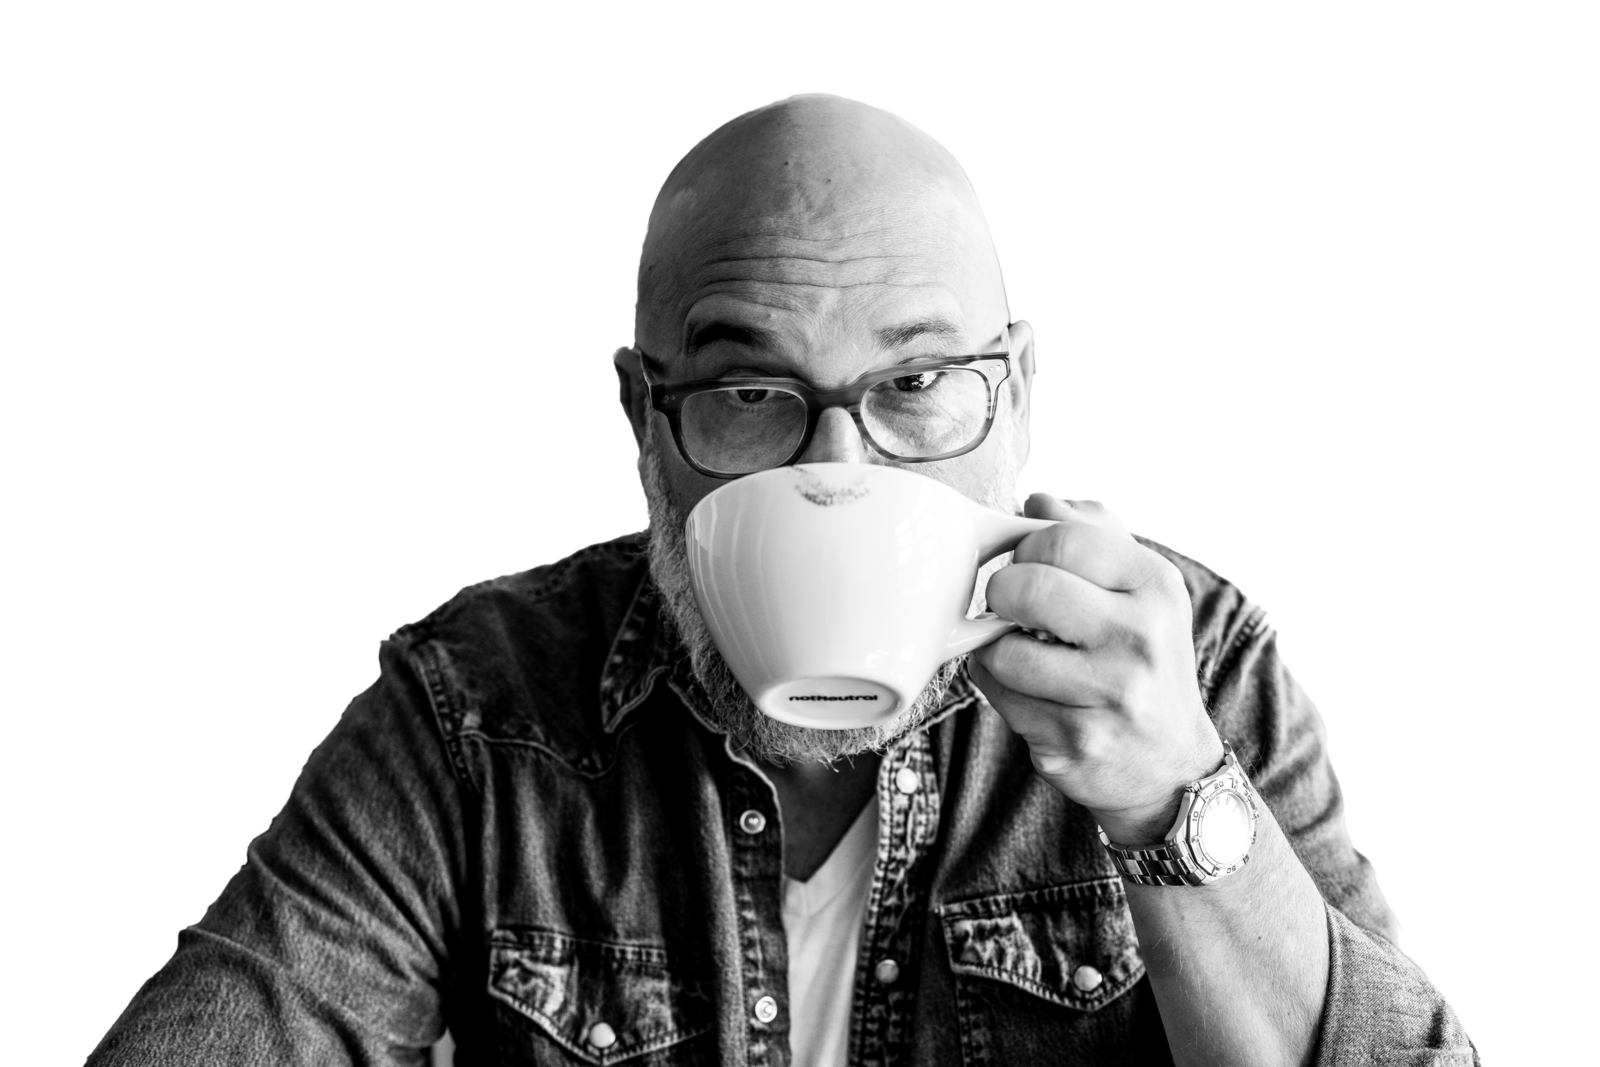 Black and White photo of Sky drinking coffee from a mug while looking at the camera